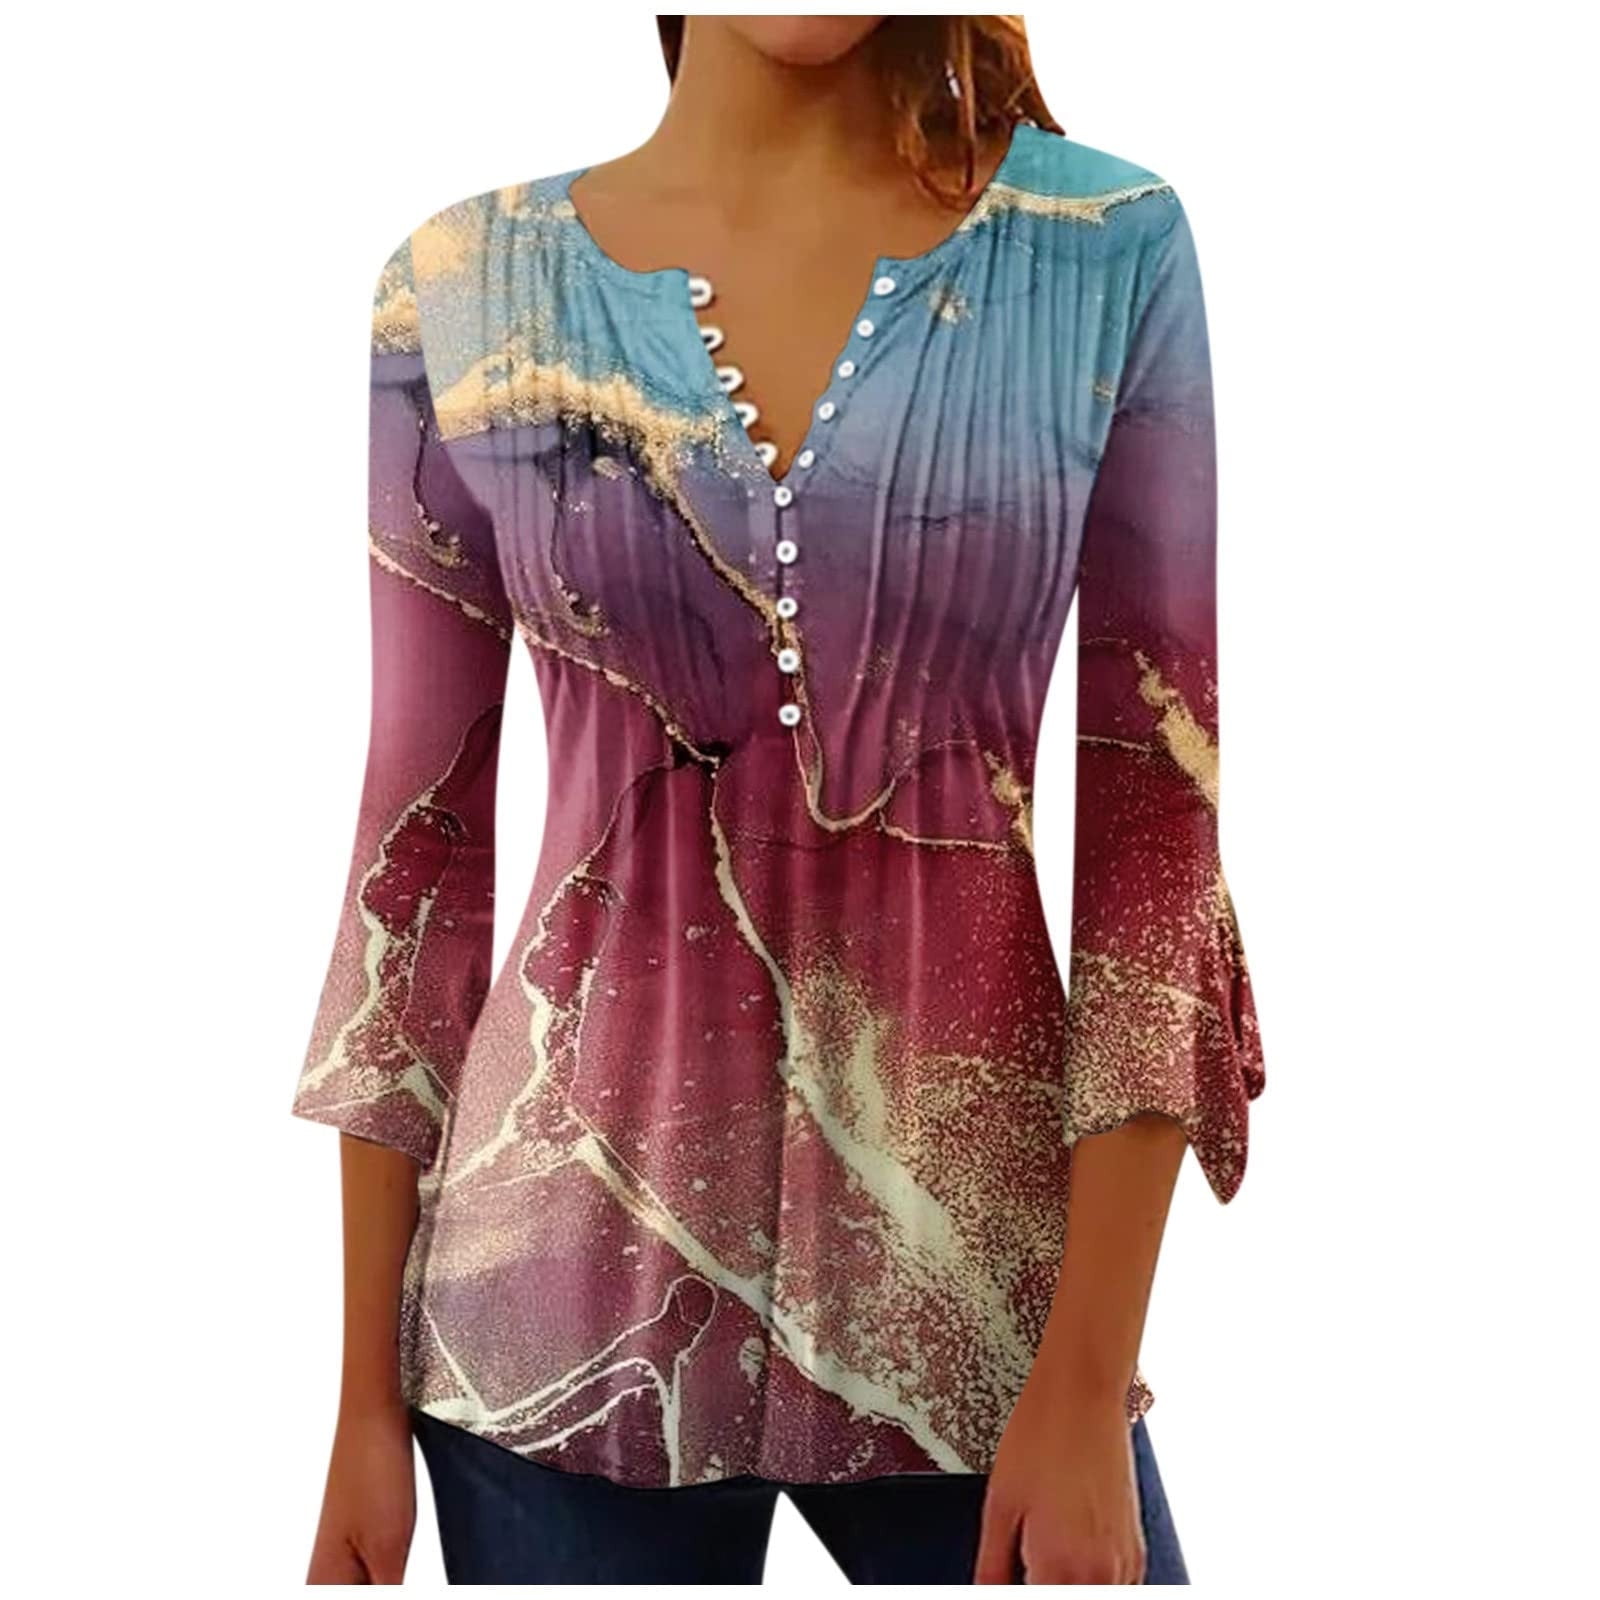 Blouses for Women Dressy Casual Floral Print Button Up 3/4 Sleeve Crew ...